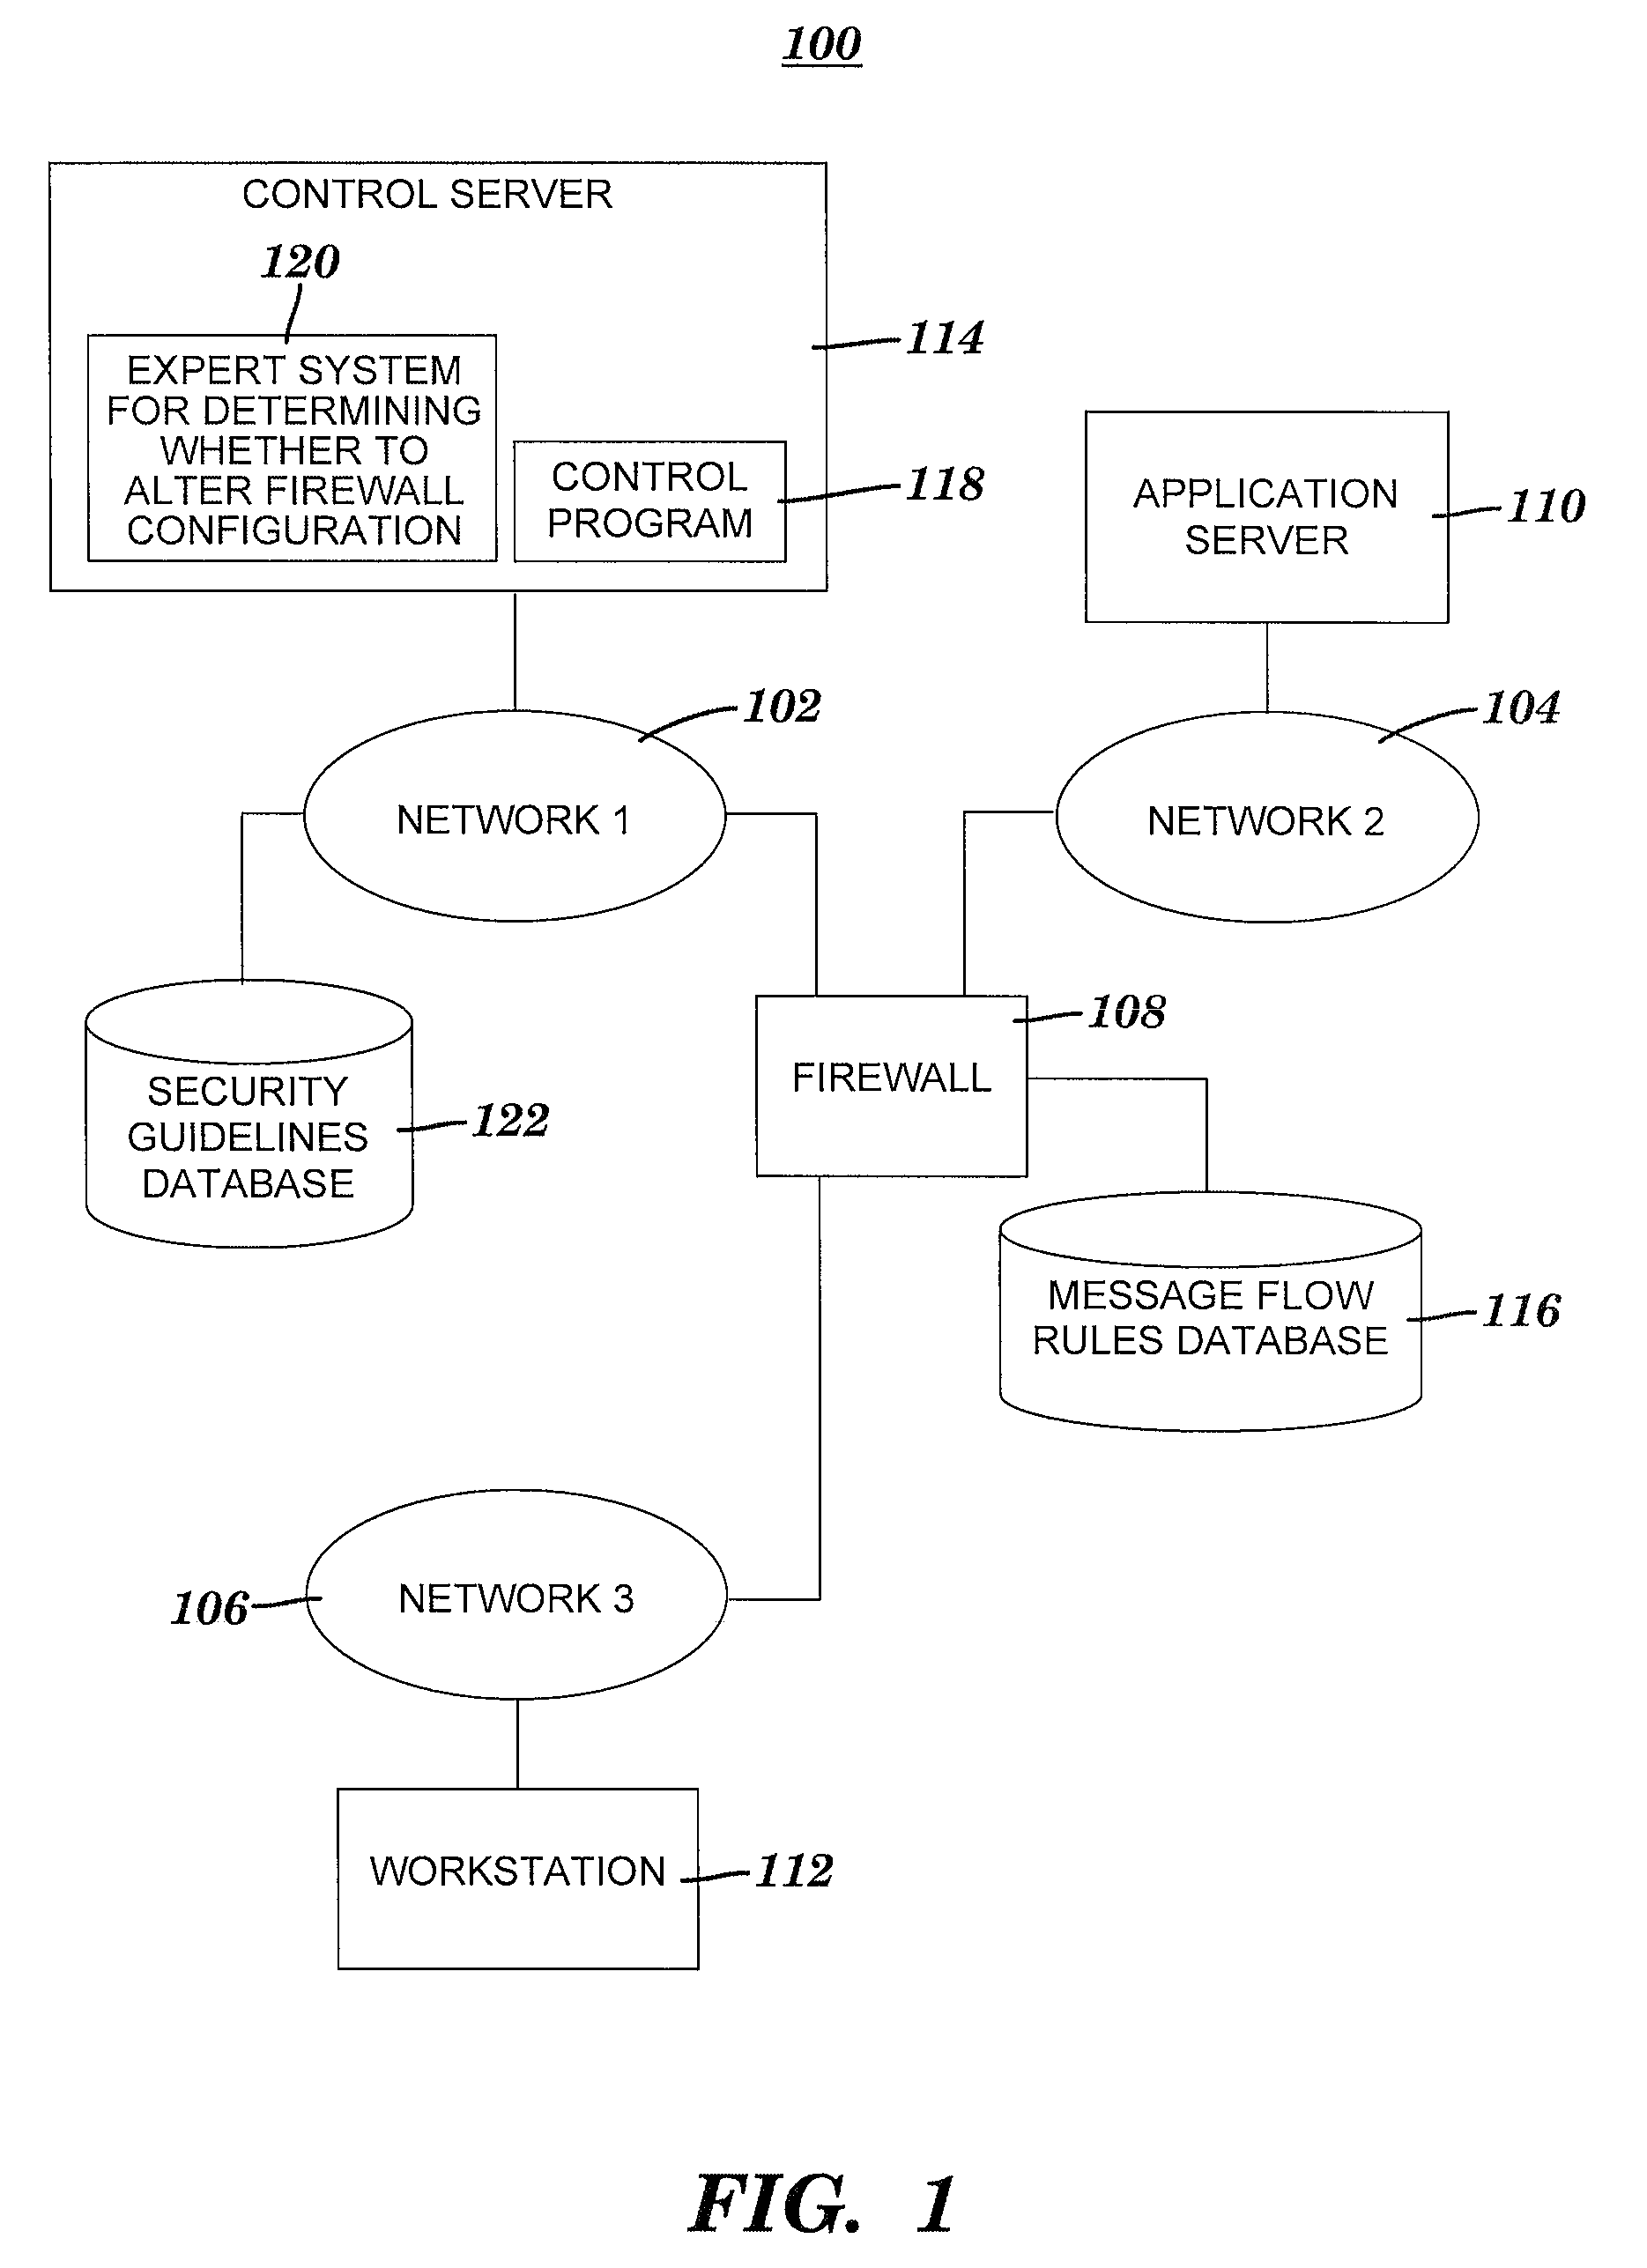 Method and sysem for utilizing an expert system to determine whether to alter a firewall configuration